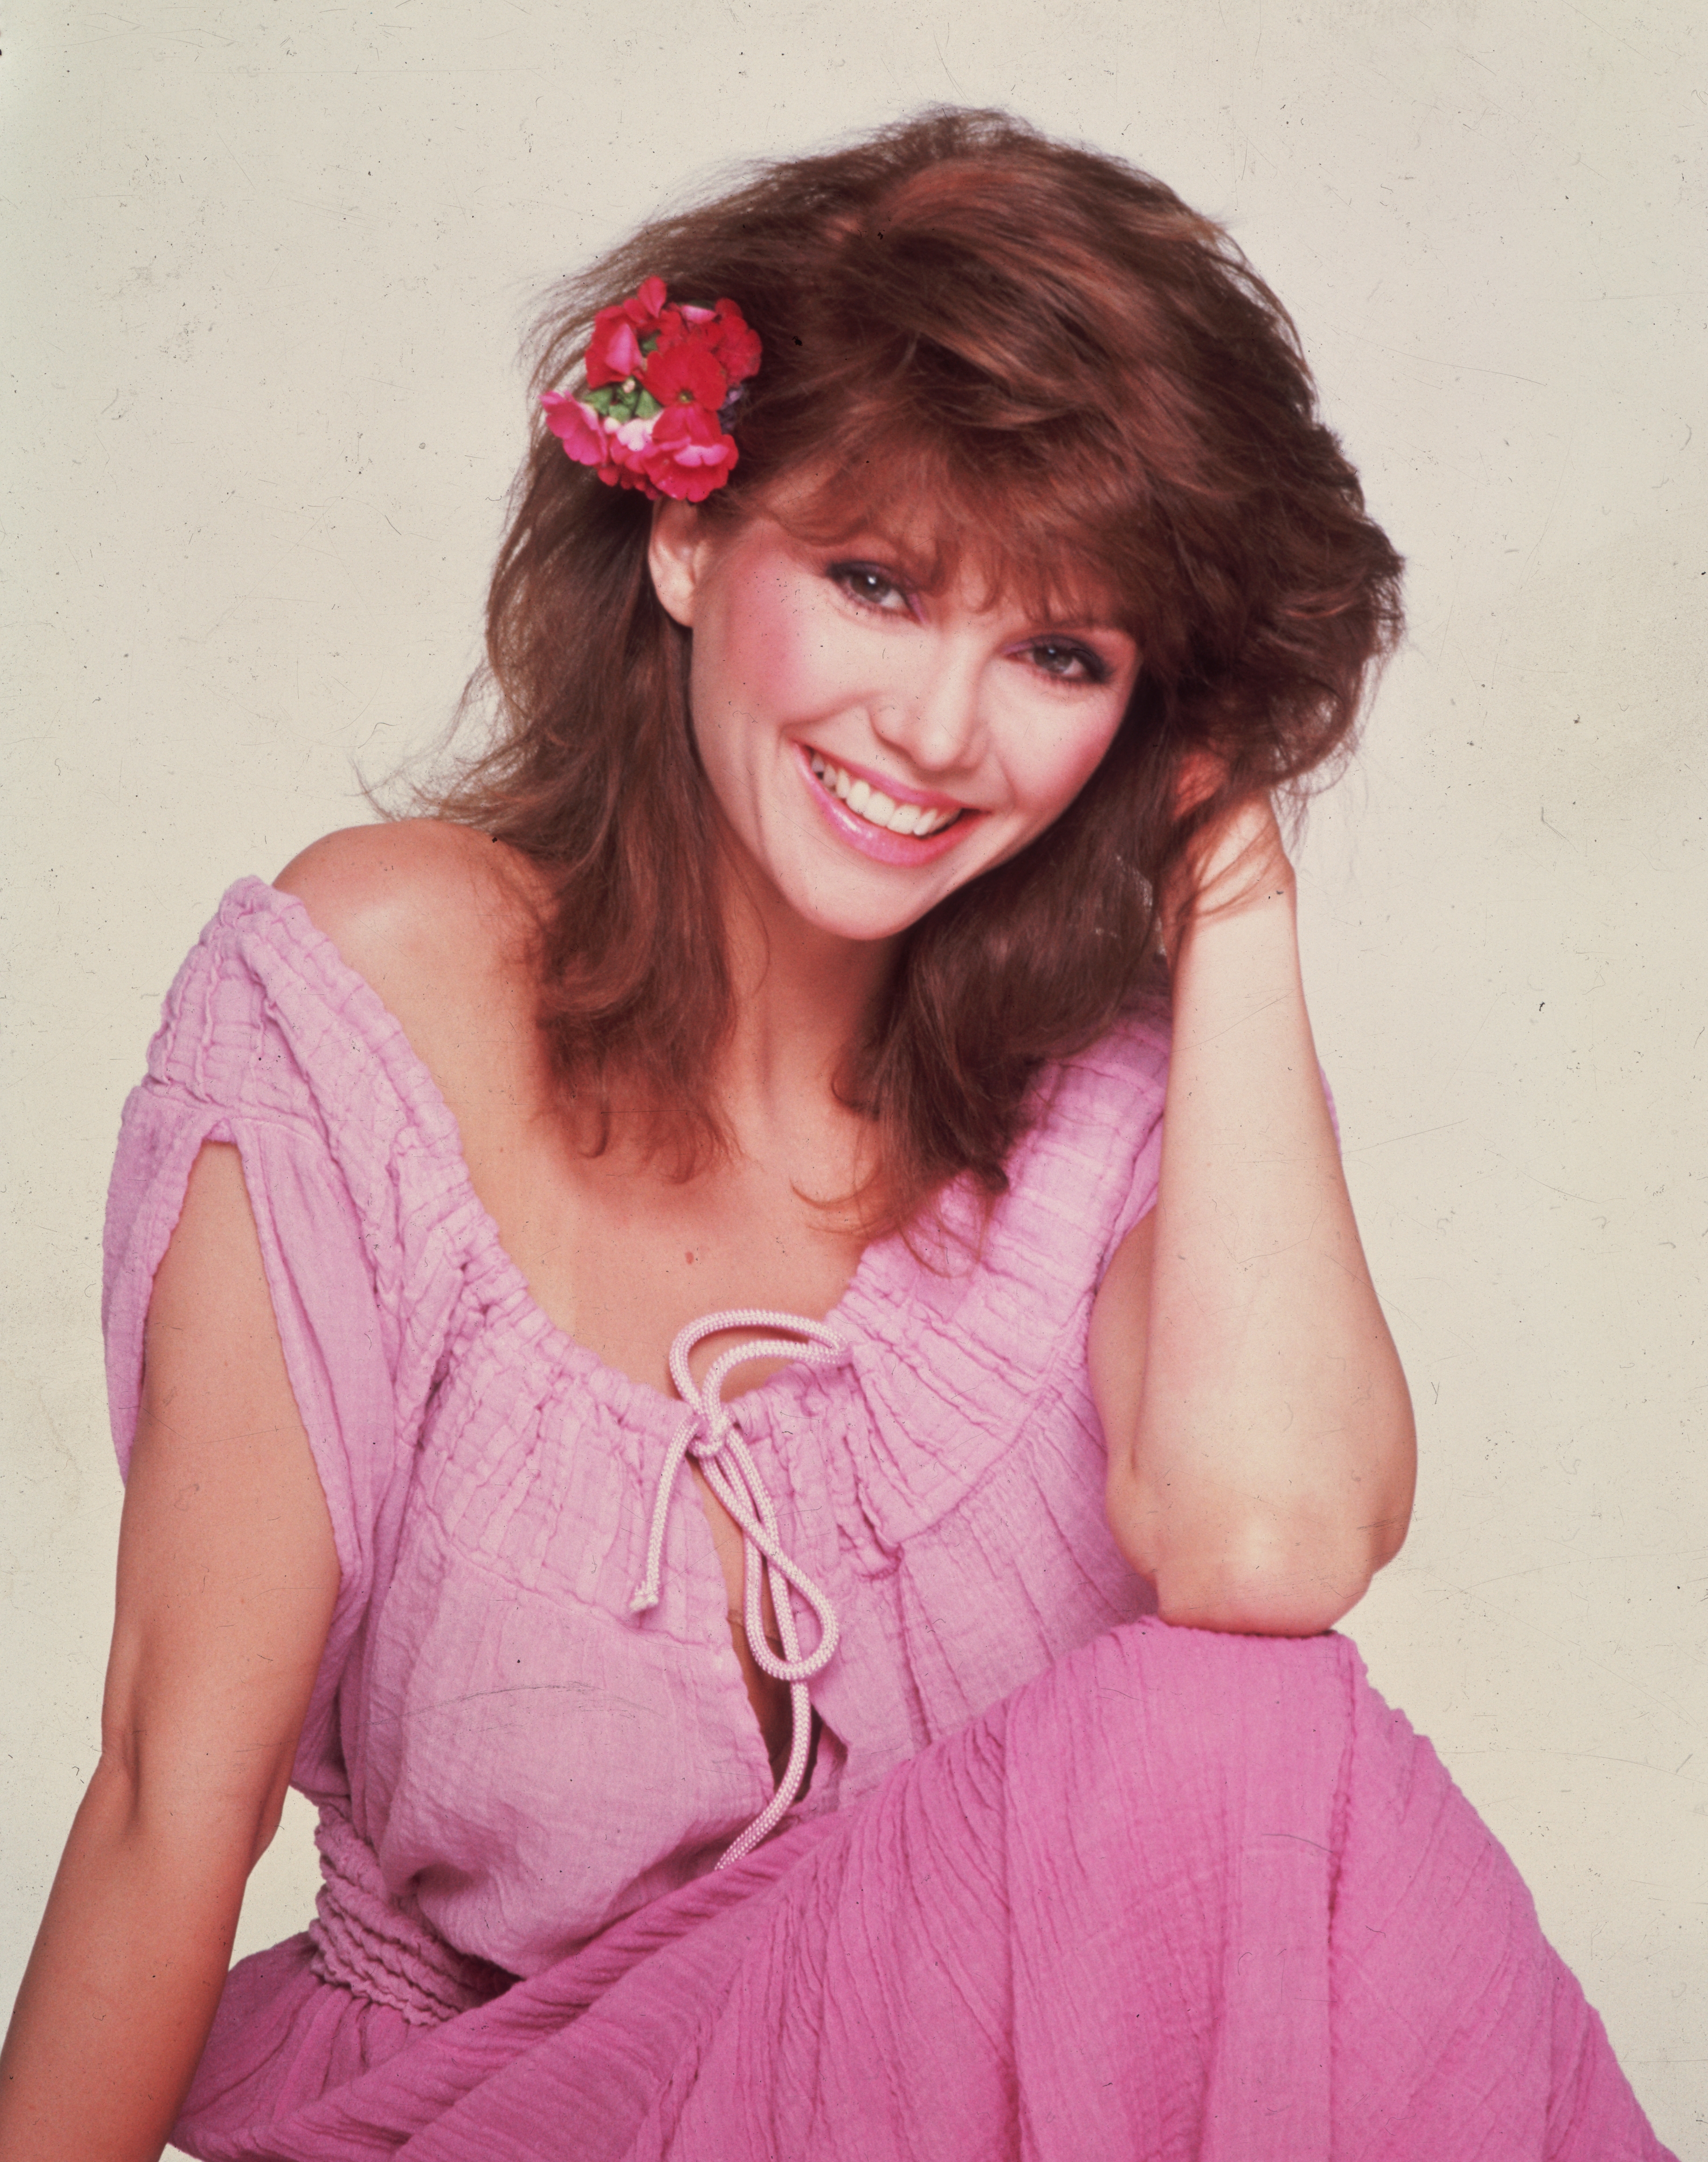 Victoria Principal on the set of "Dallas" in 1985 | Source: Getty Images